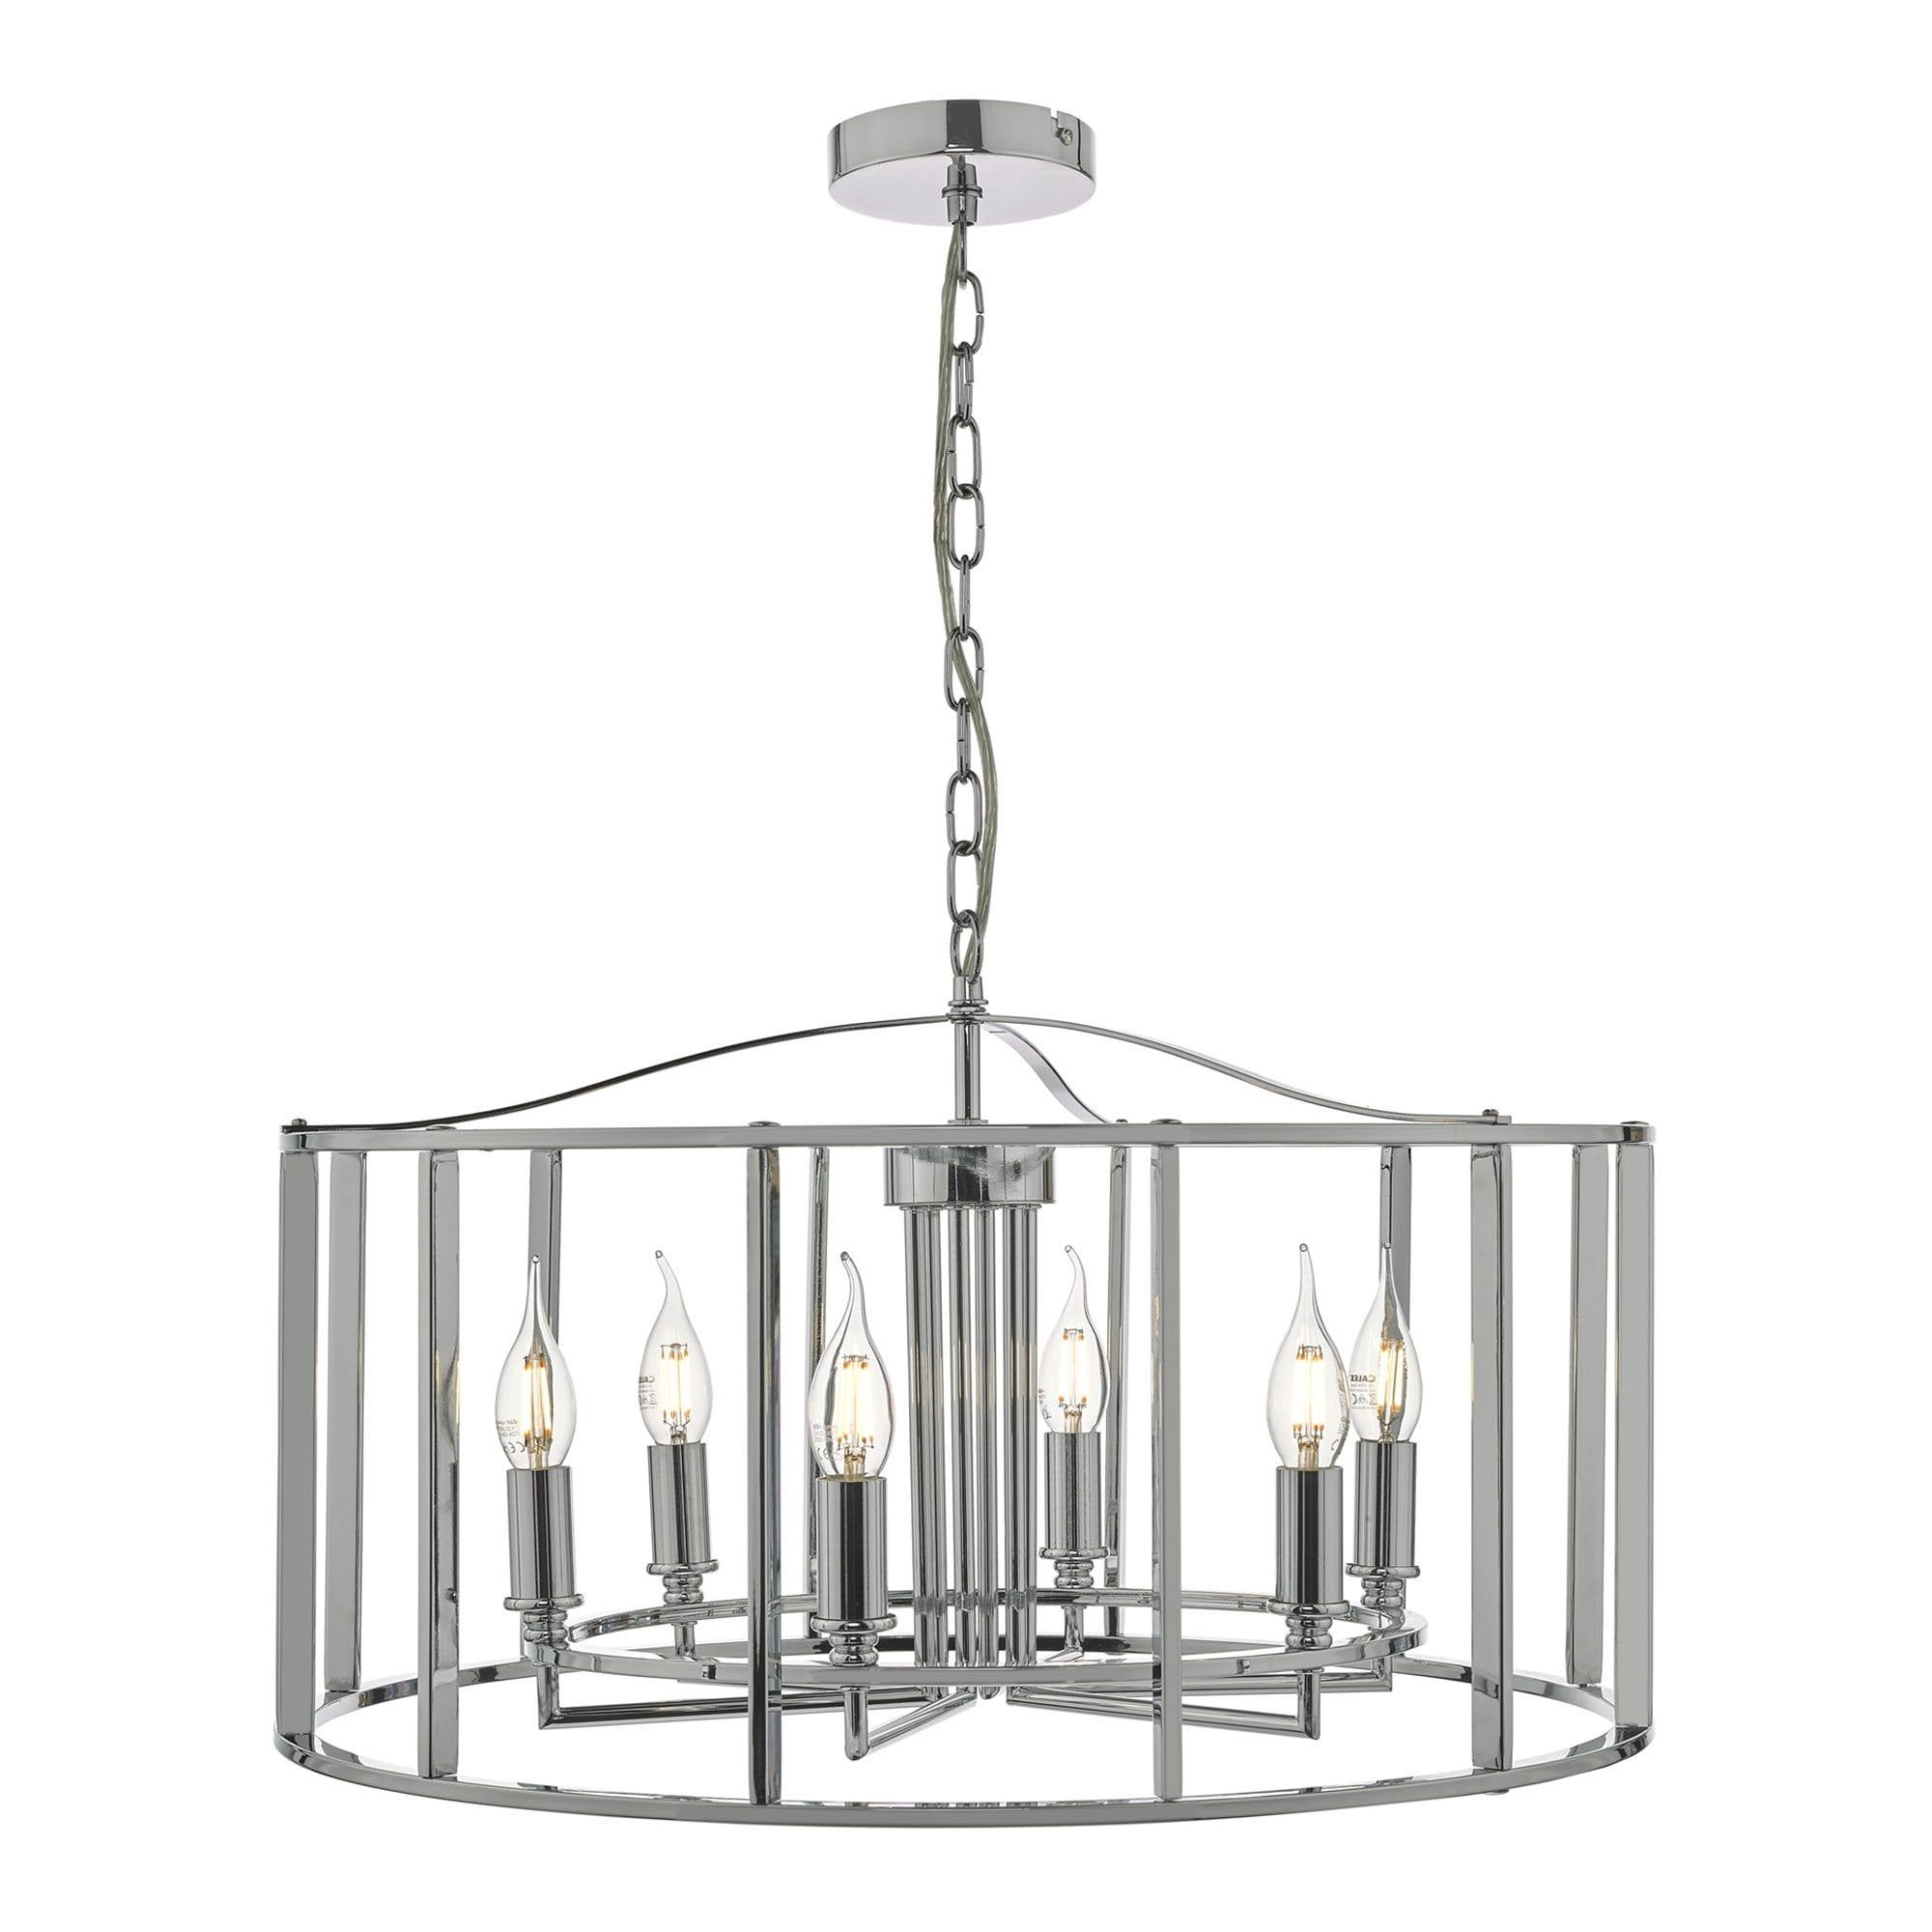 Dar Lighting 2020/21 Myk0650 Myka 6 Light Indoor Lantern Pendant In  Polished Chrome Finish 45463 – Indoor Lighting From Castlegate Lights Uk Within Well Known Six Light Lantern Chandeliers (View 4 of 15)